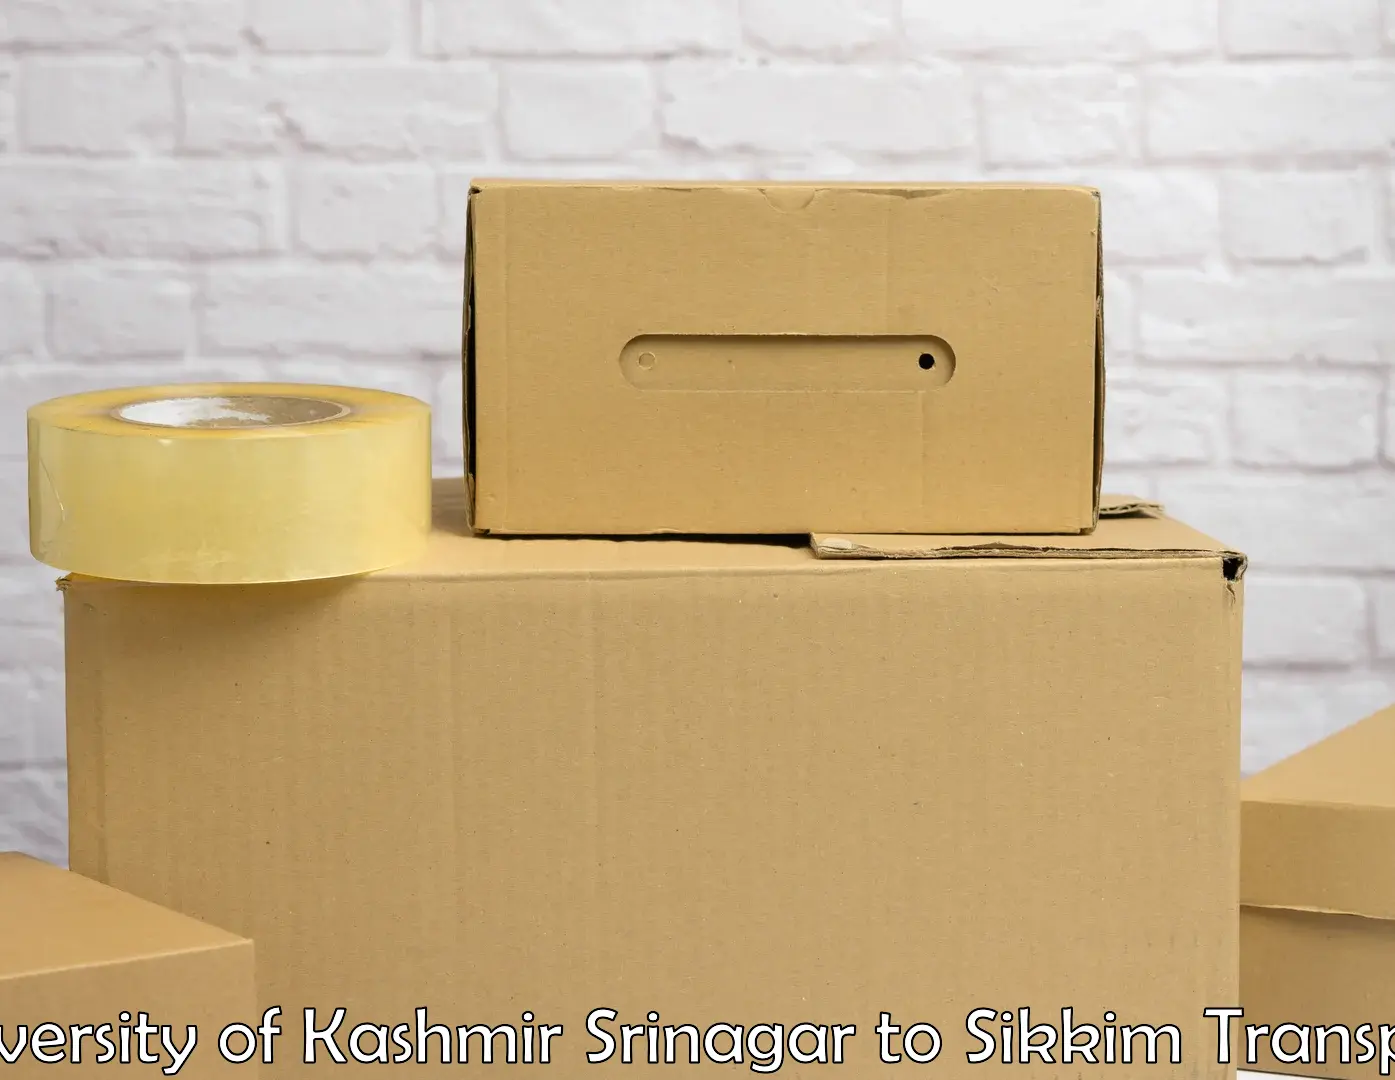 Package delivery services in University of Kashmir Srinagar to Pelling